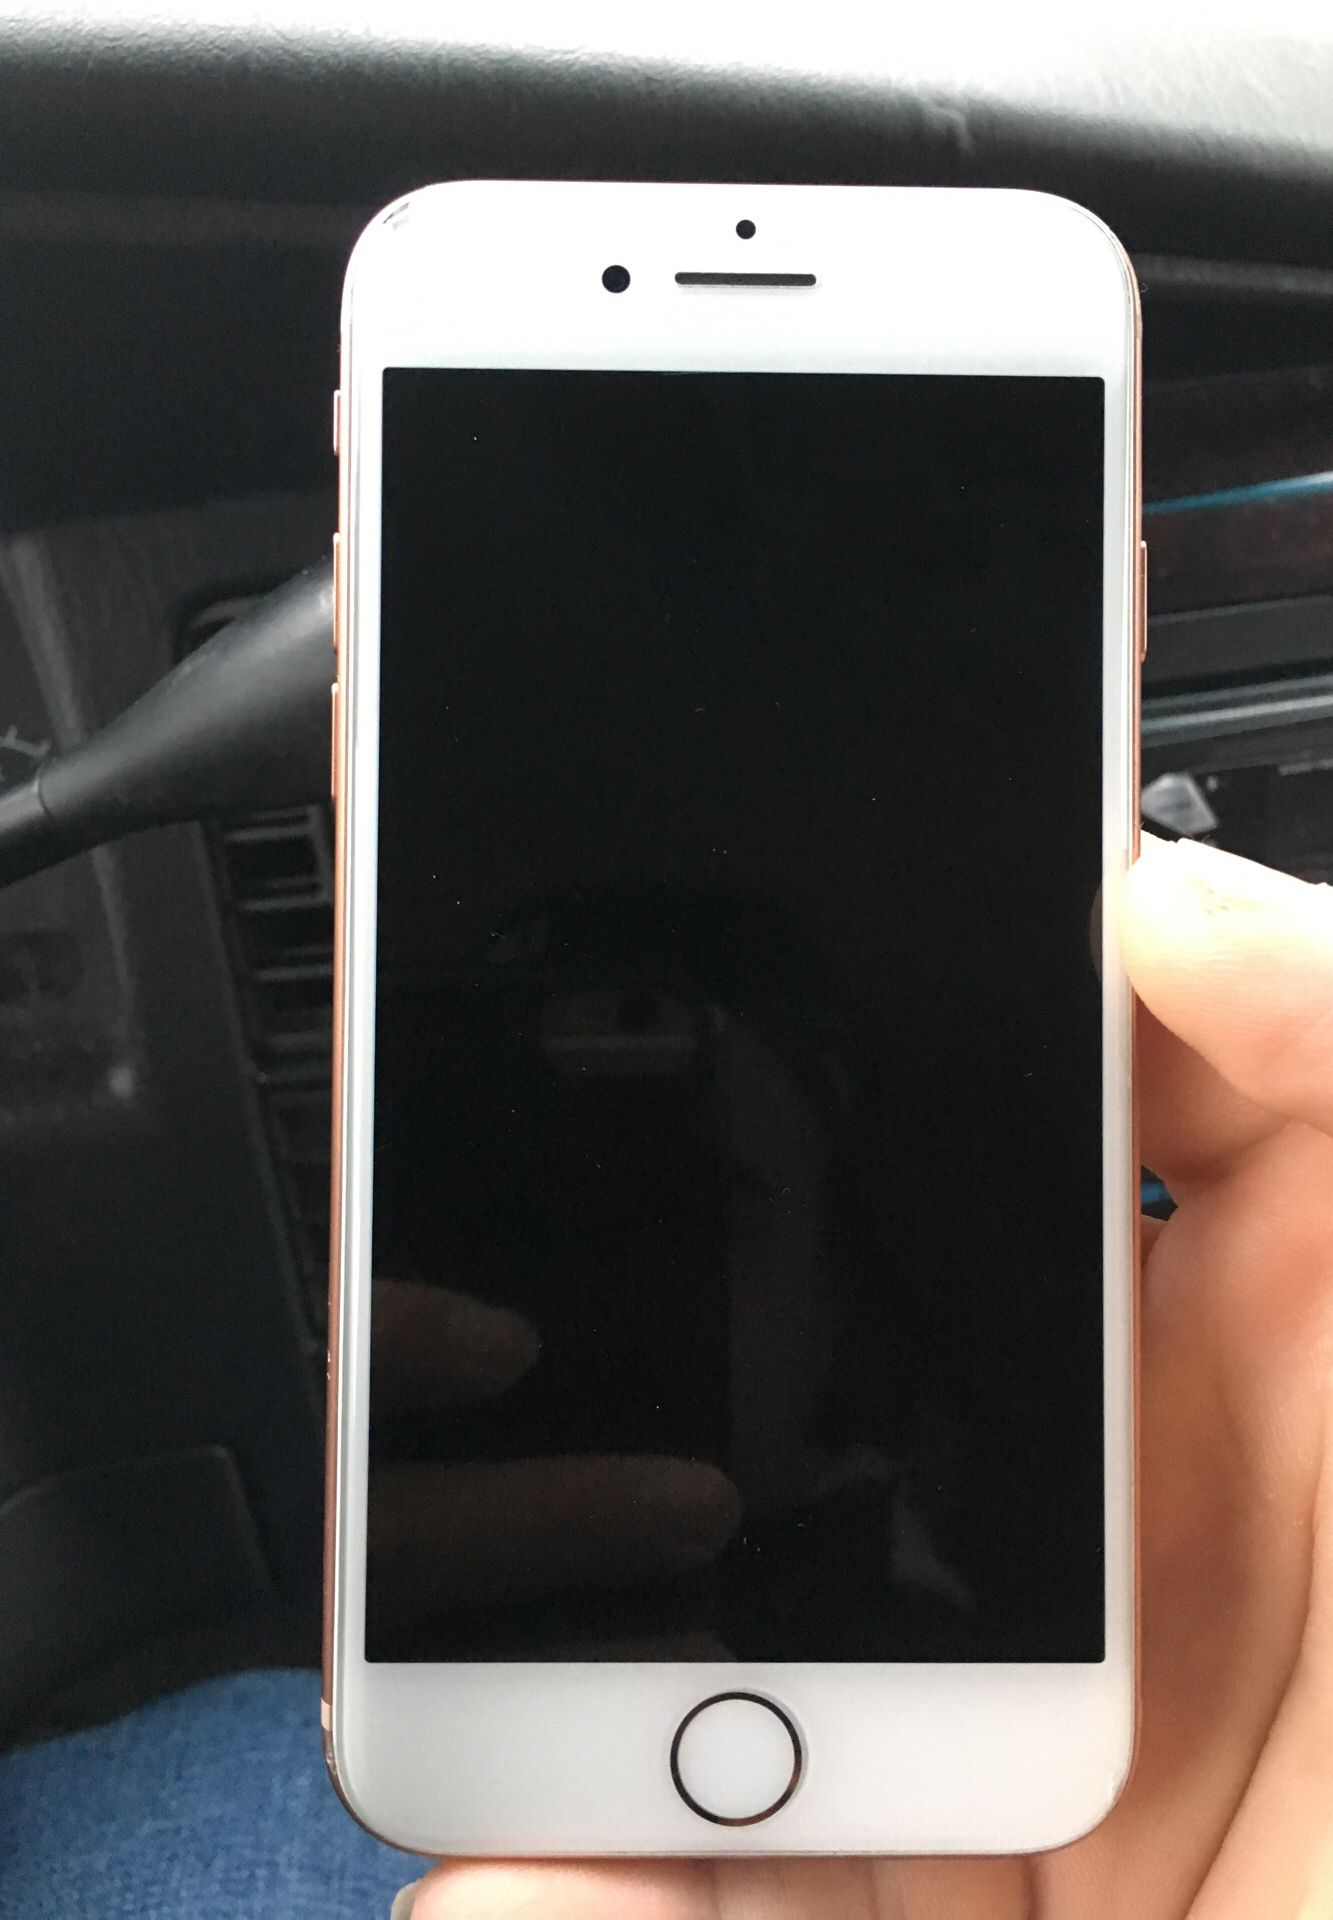 iPhone 8 64gb model A1863 does not turn on